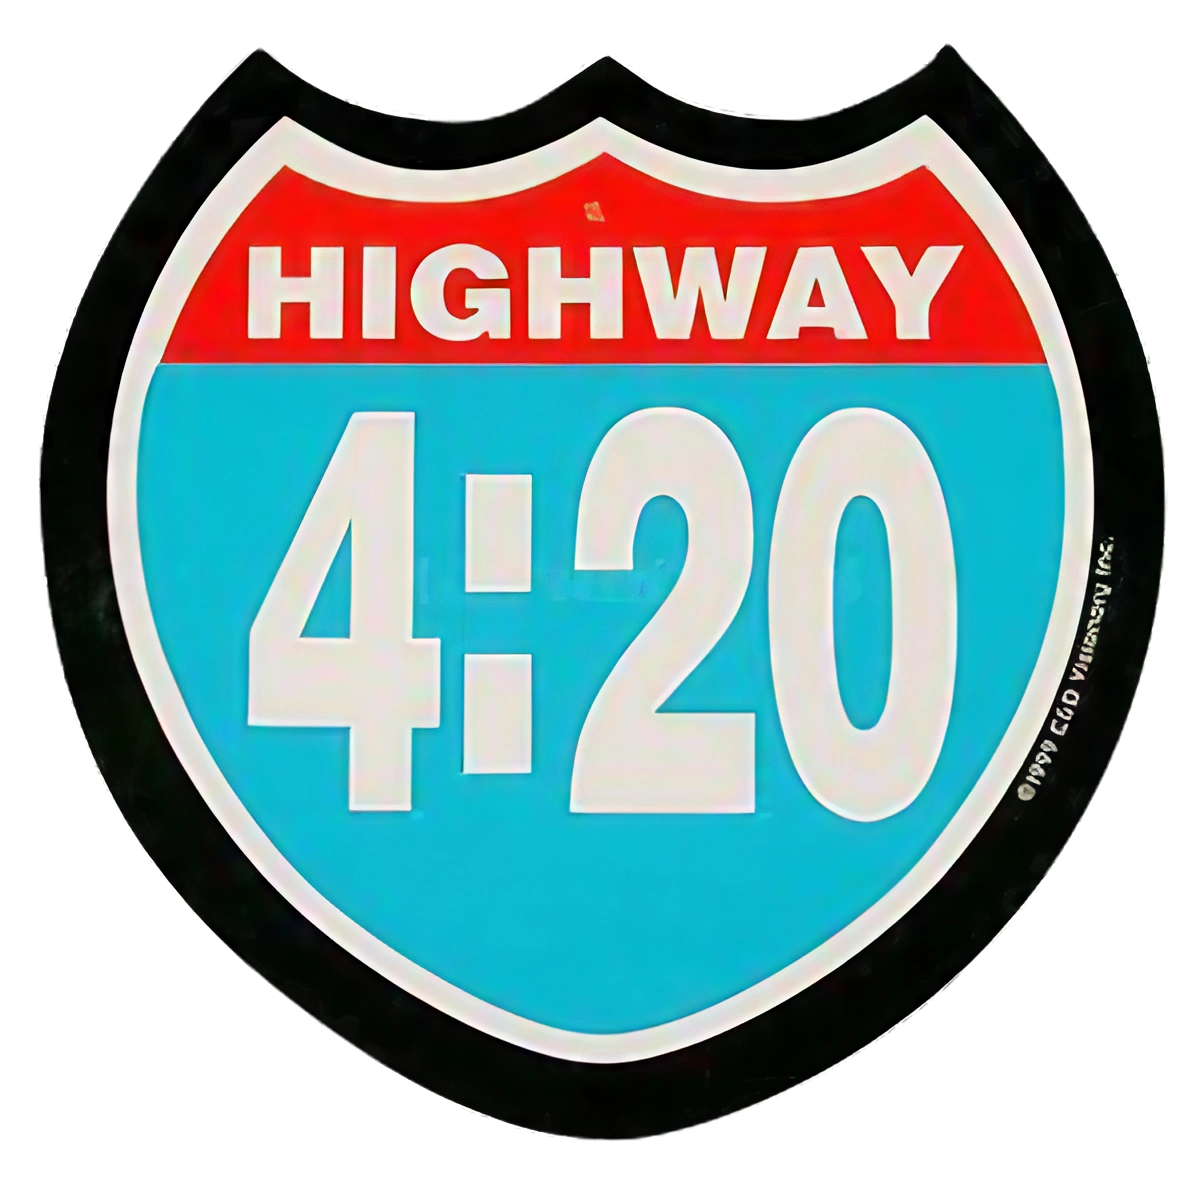 Highway 420 shield-shaped sticker with vibrant colors, perfect for novelty gift, 4" x 4" size